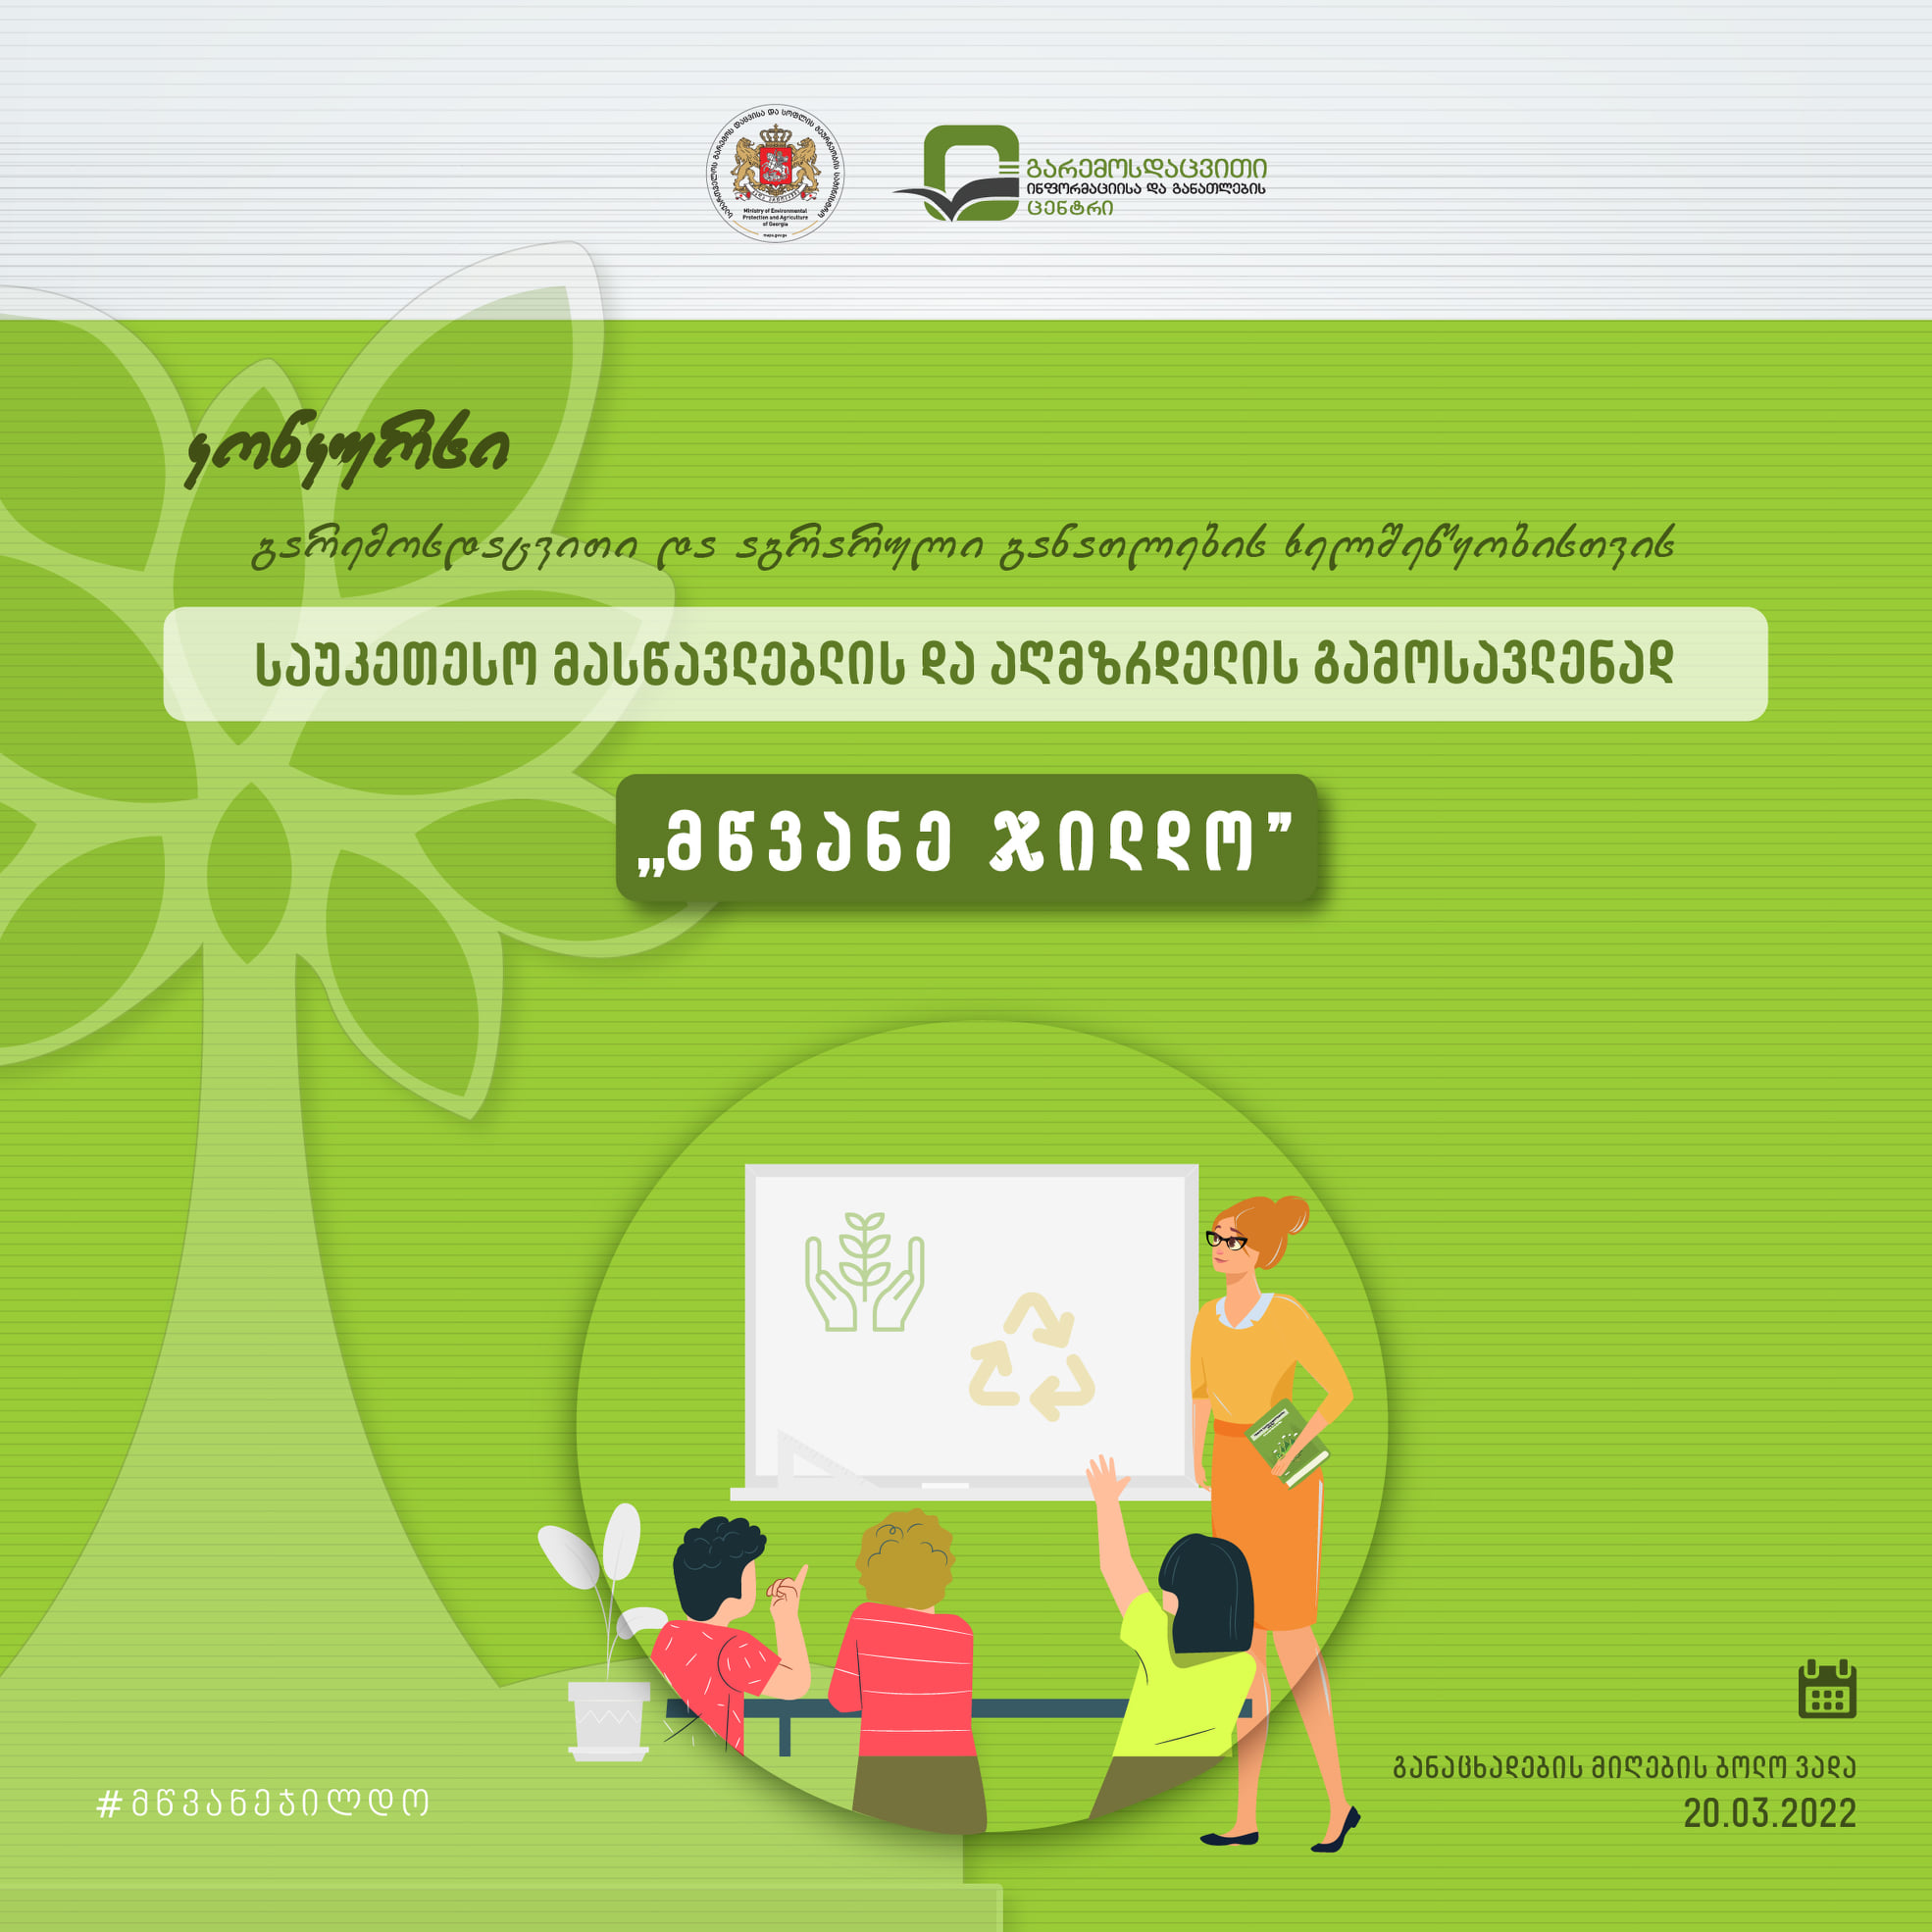 The Ministry of Environmental Protection and Agriculture of Georgia announces the ‘’Green Award Contest’’